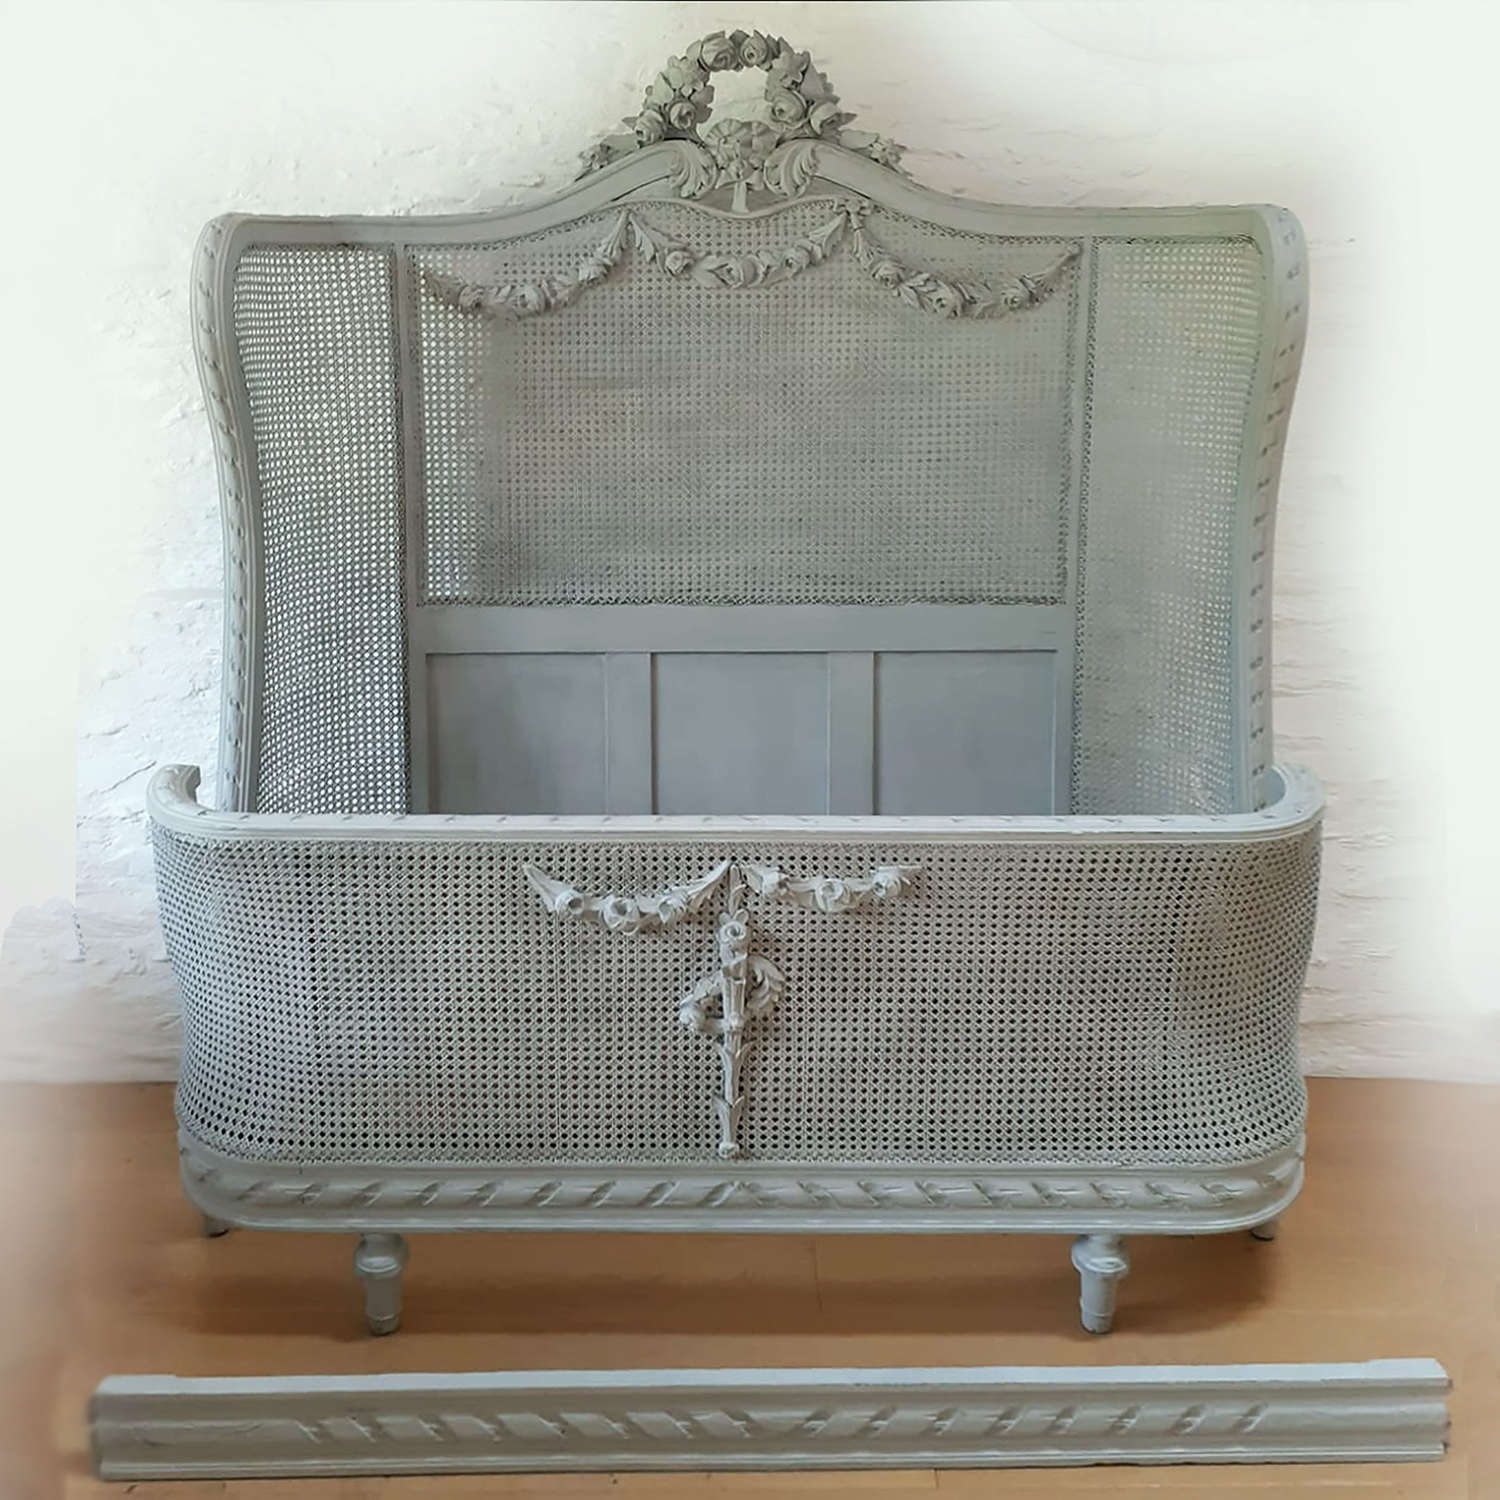 Late 19th Century Louis XVI style cane bedstead